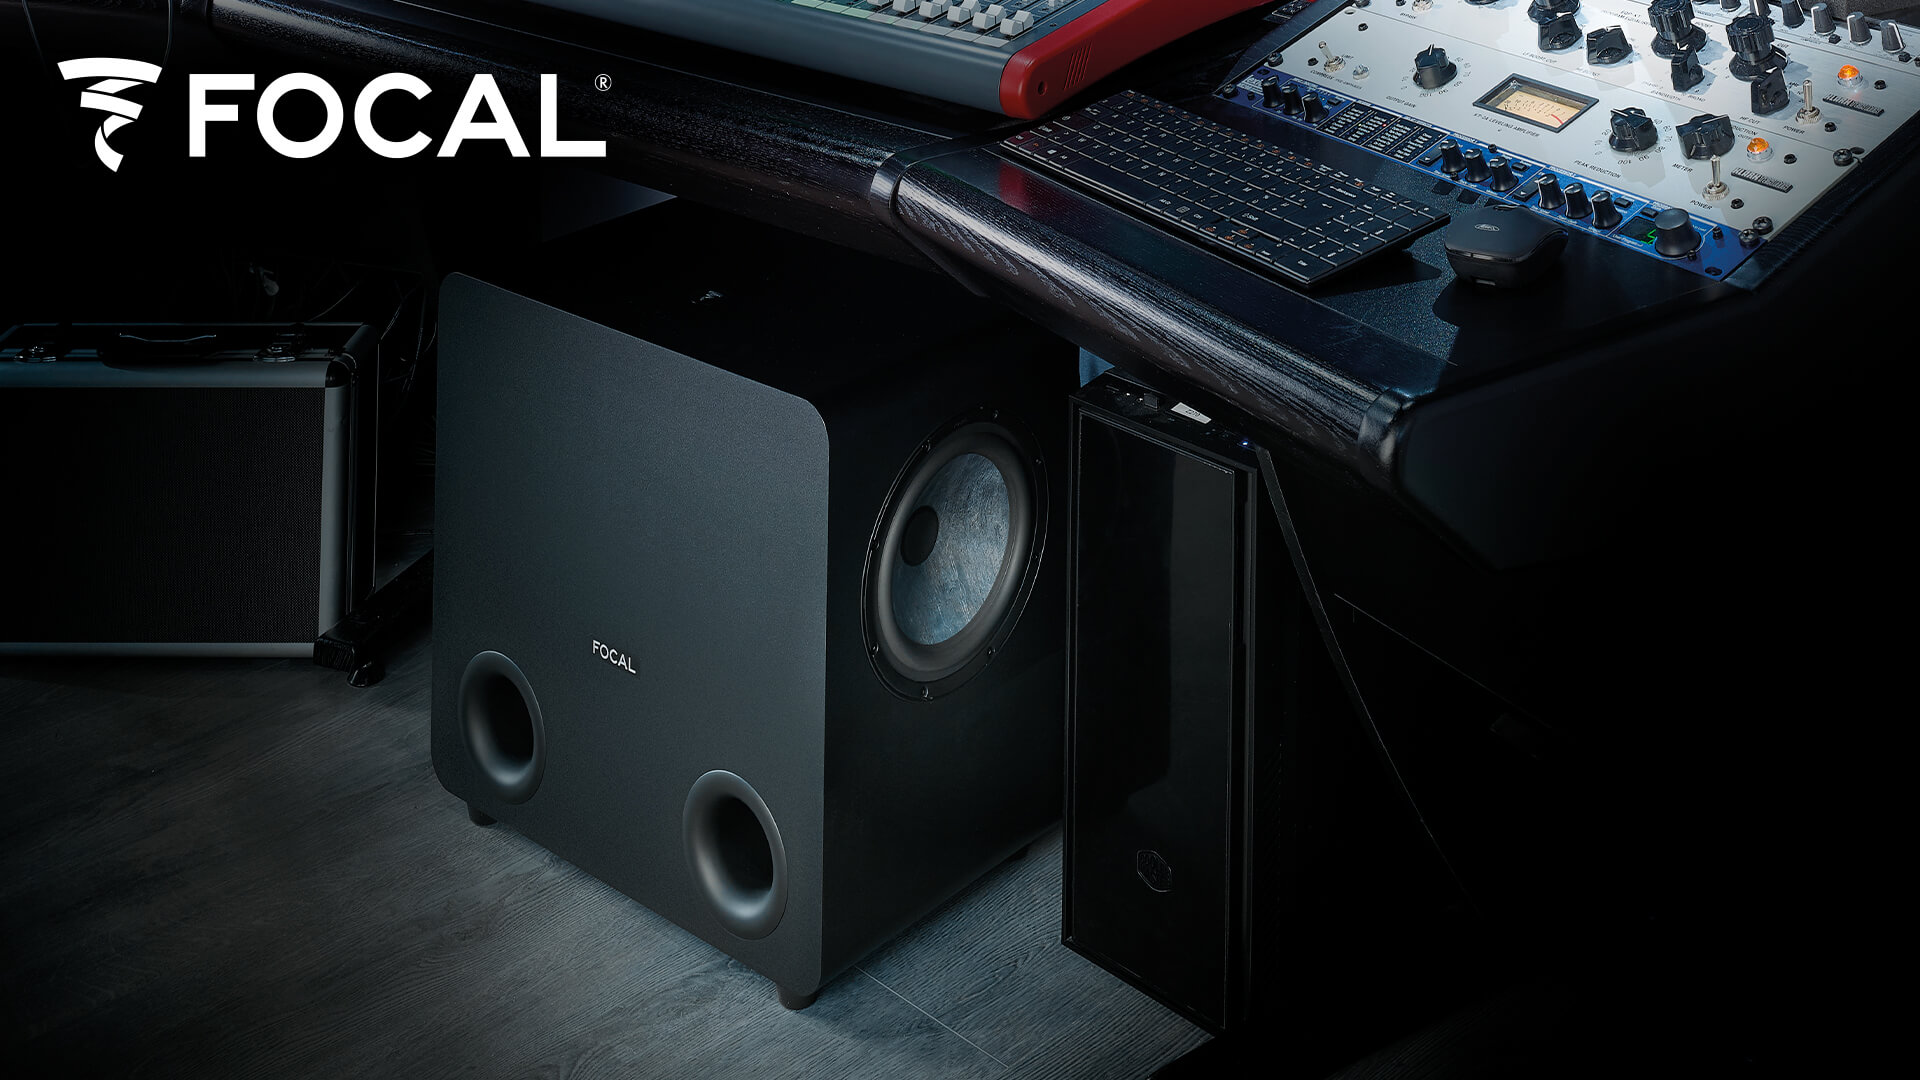 Focal Sub One for EVO Series